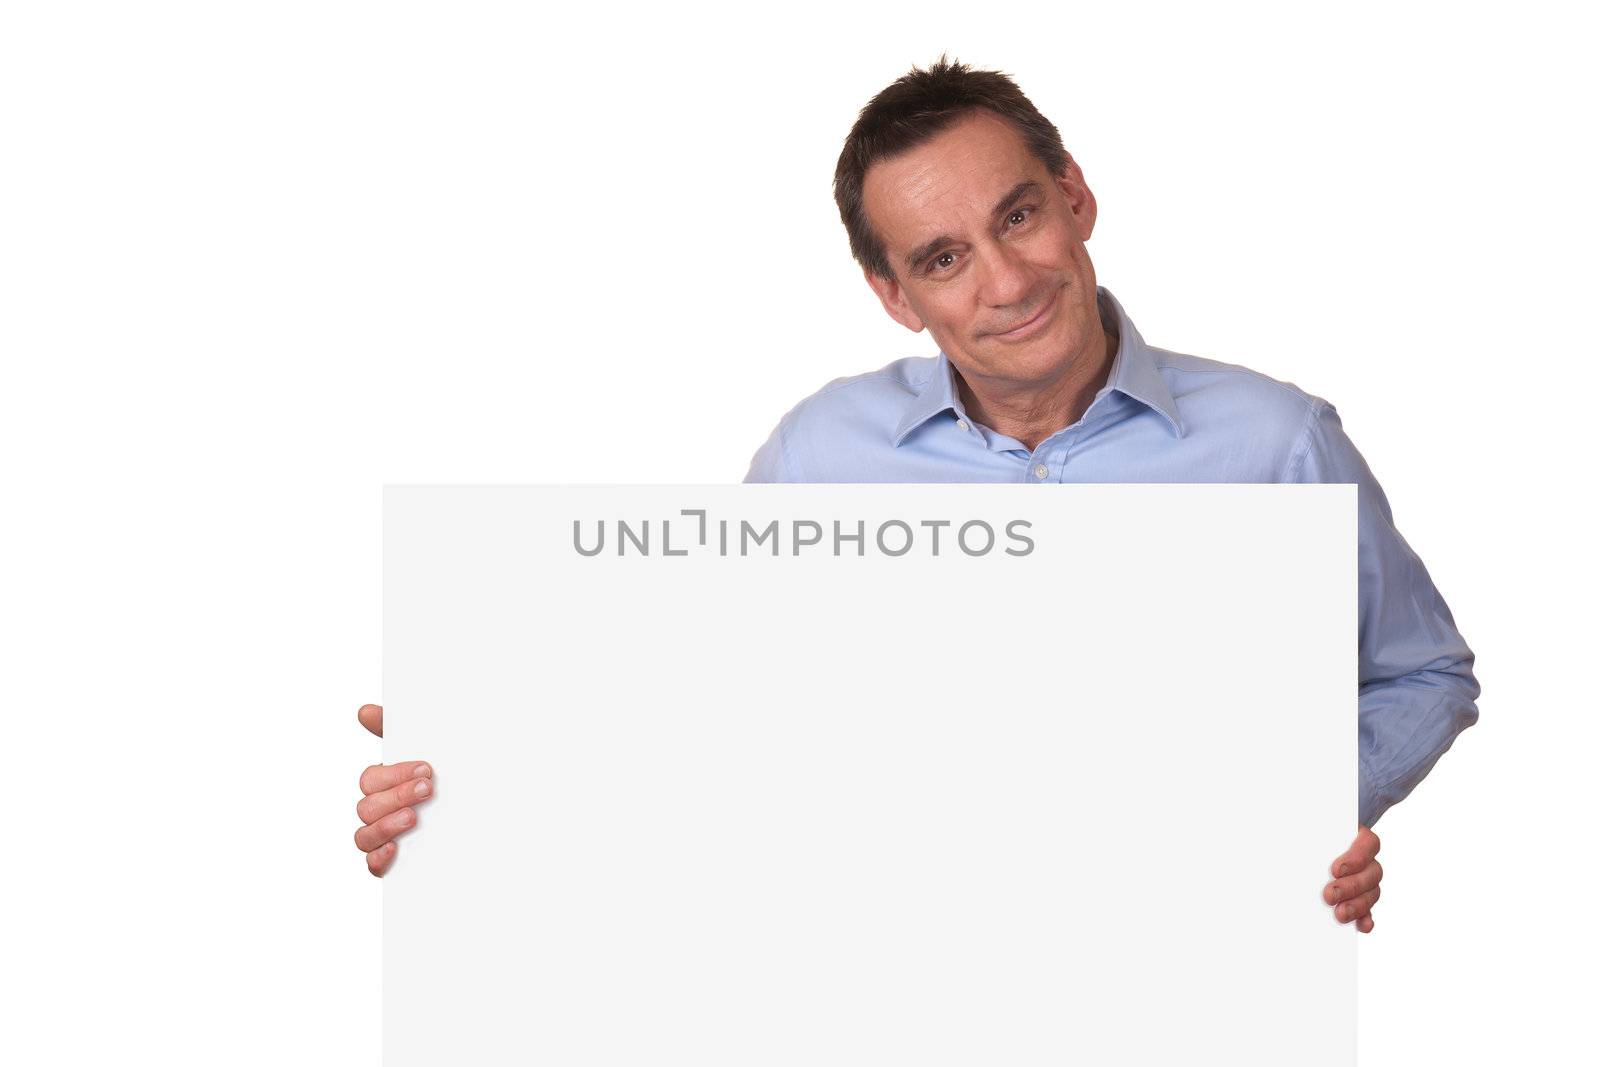 Attractive Middle Age Man Holding Blank White Sign with Copy Space Isolated